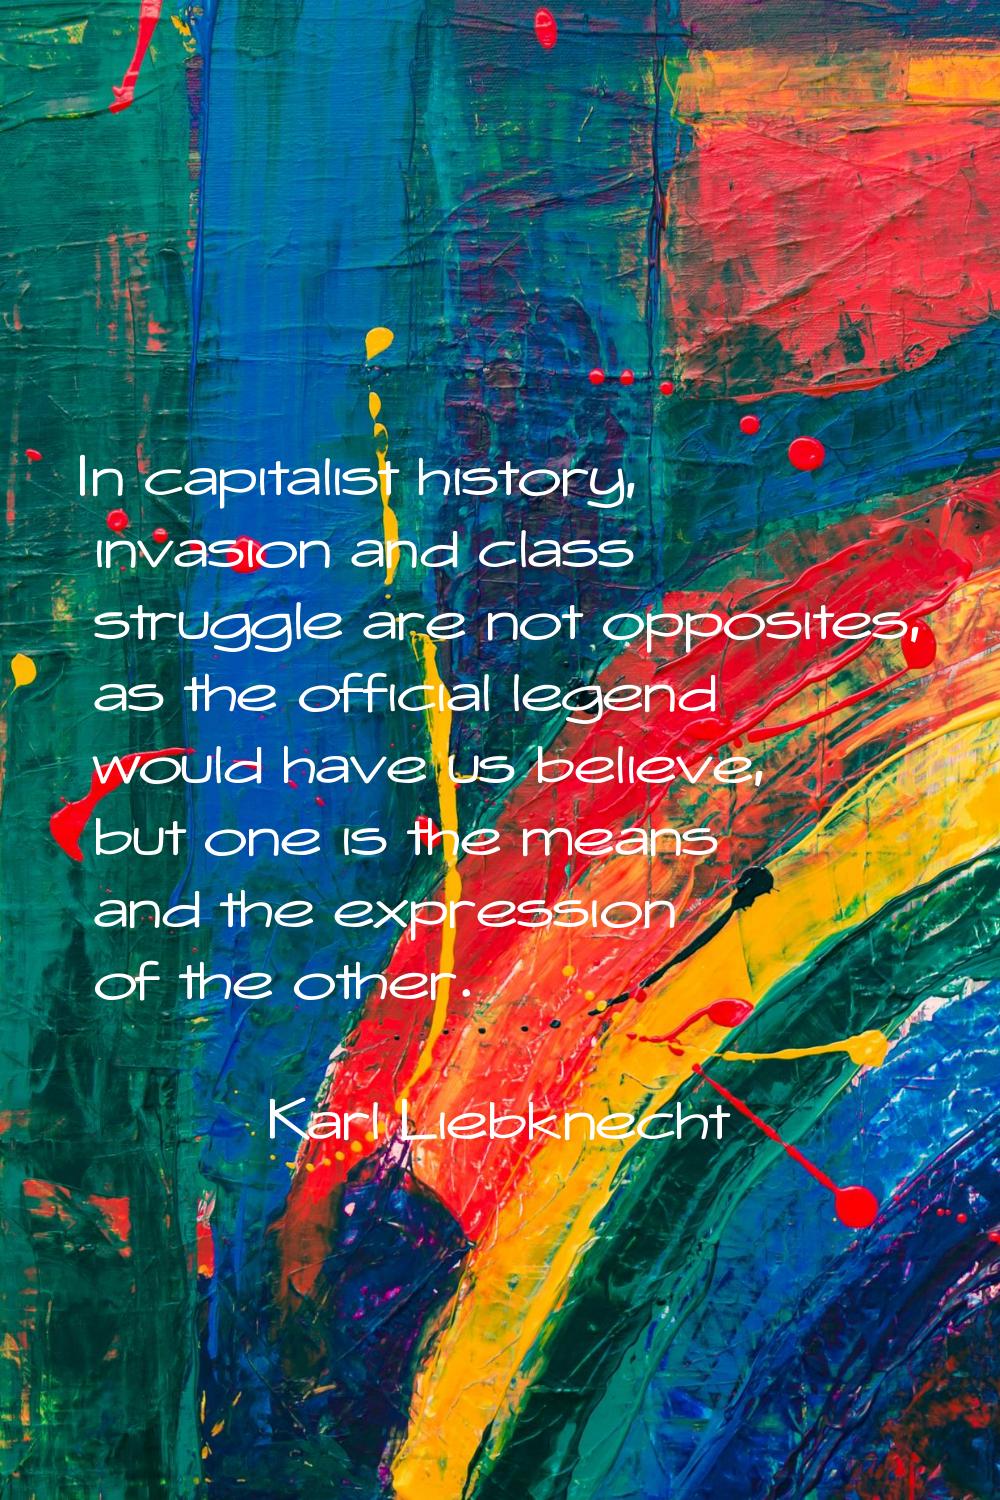 In capitalist history, invasion and class struggle are not opposites, as the official legend would 